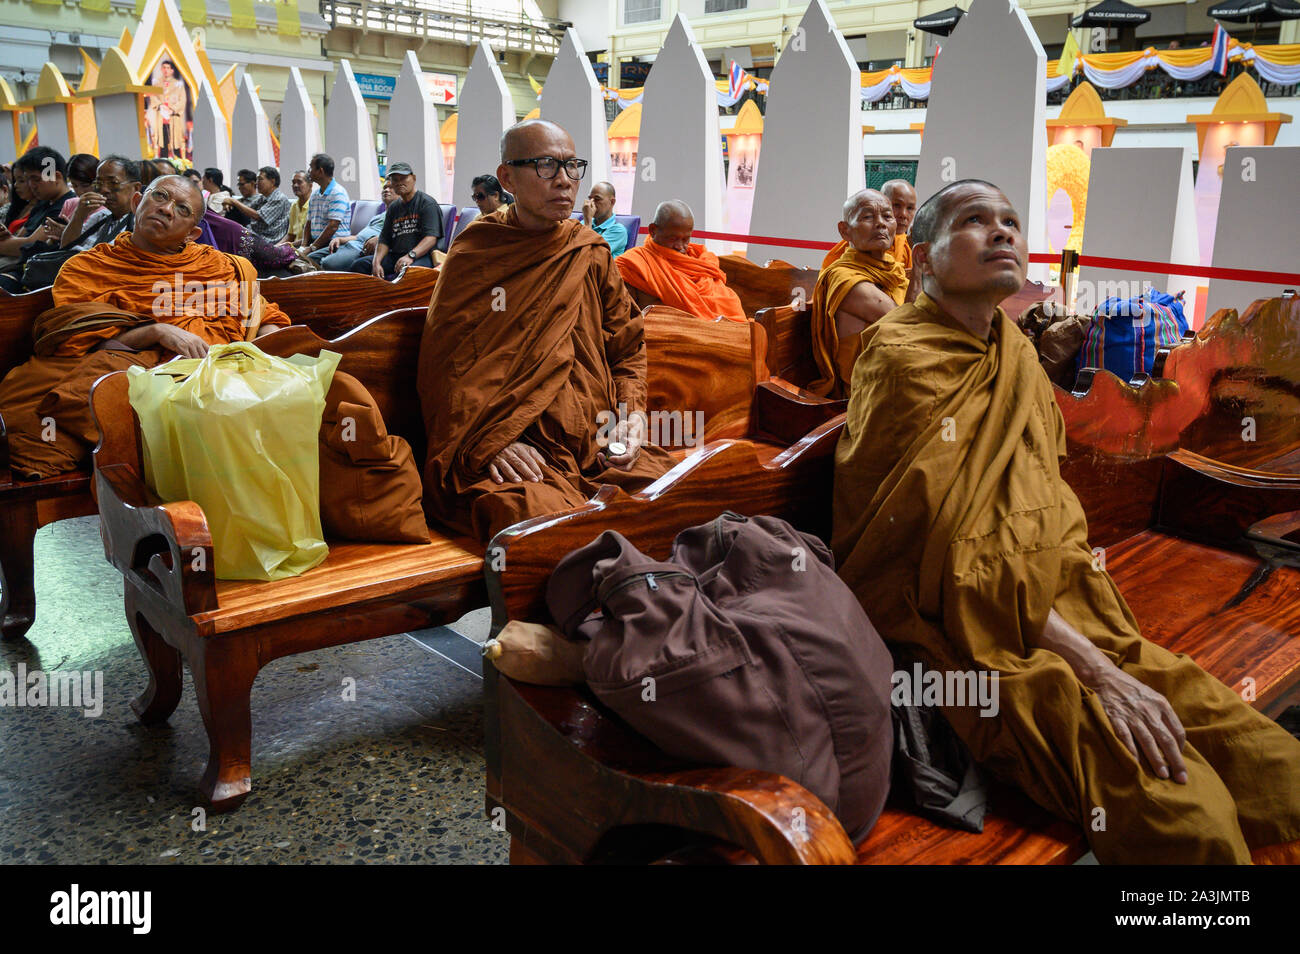 Buddhist monks seated their own exclusive area in Hua Lamphong Station, Bangkok, Thailand Stock Photo